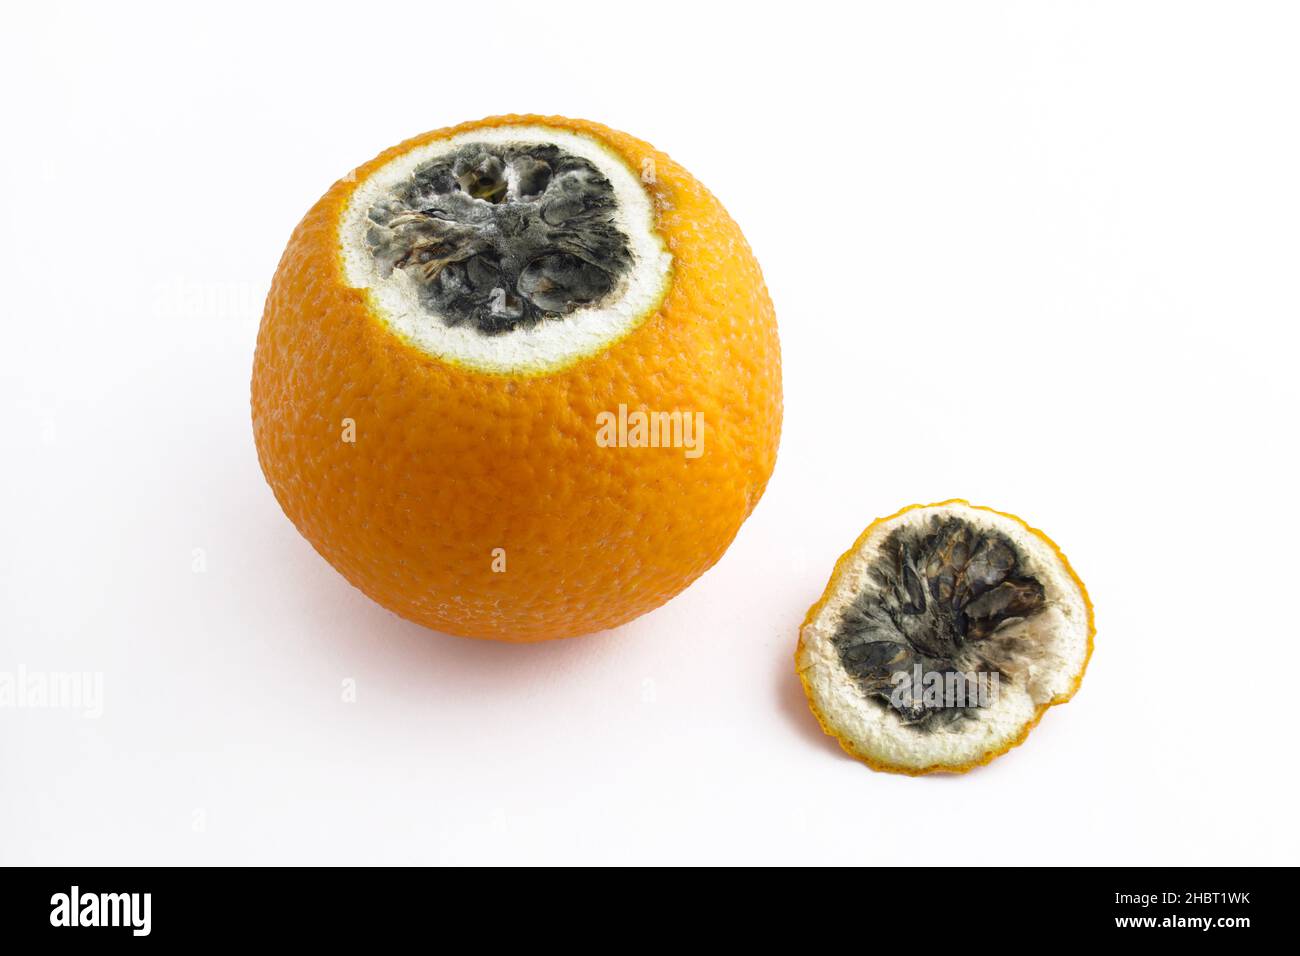 Orange rotten inside on a white background. A spoiled orange peeled. A rotten orange that's whole on the outside. Stock Photo